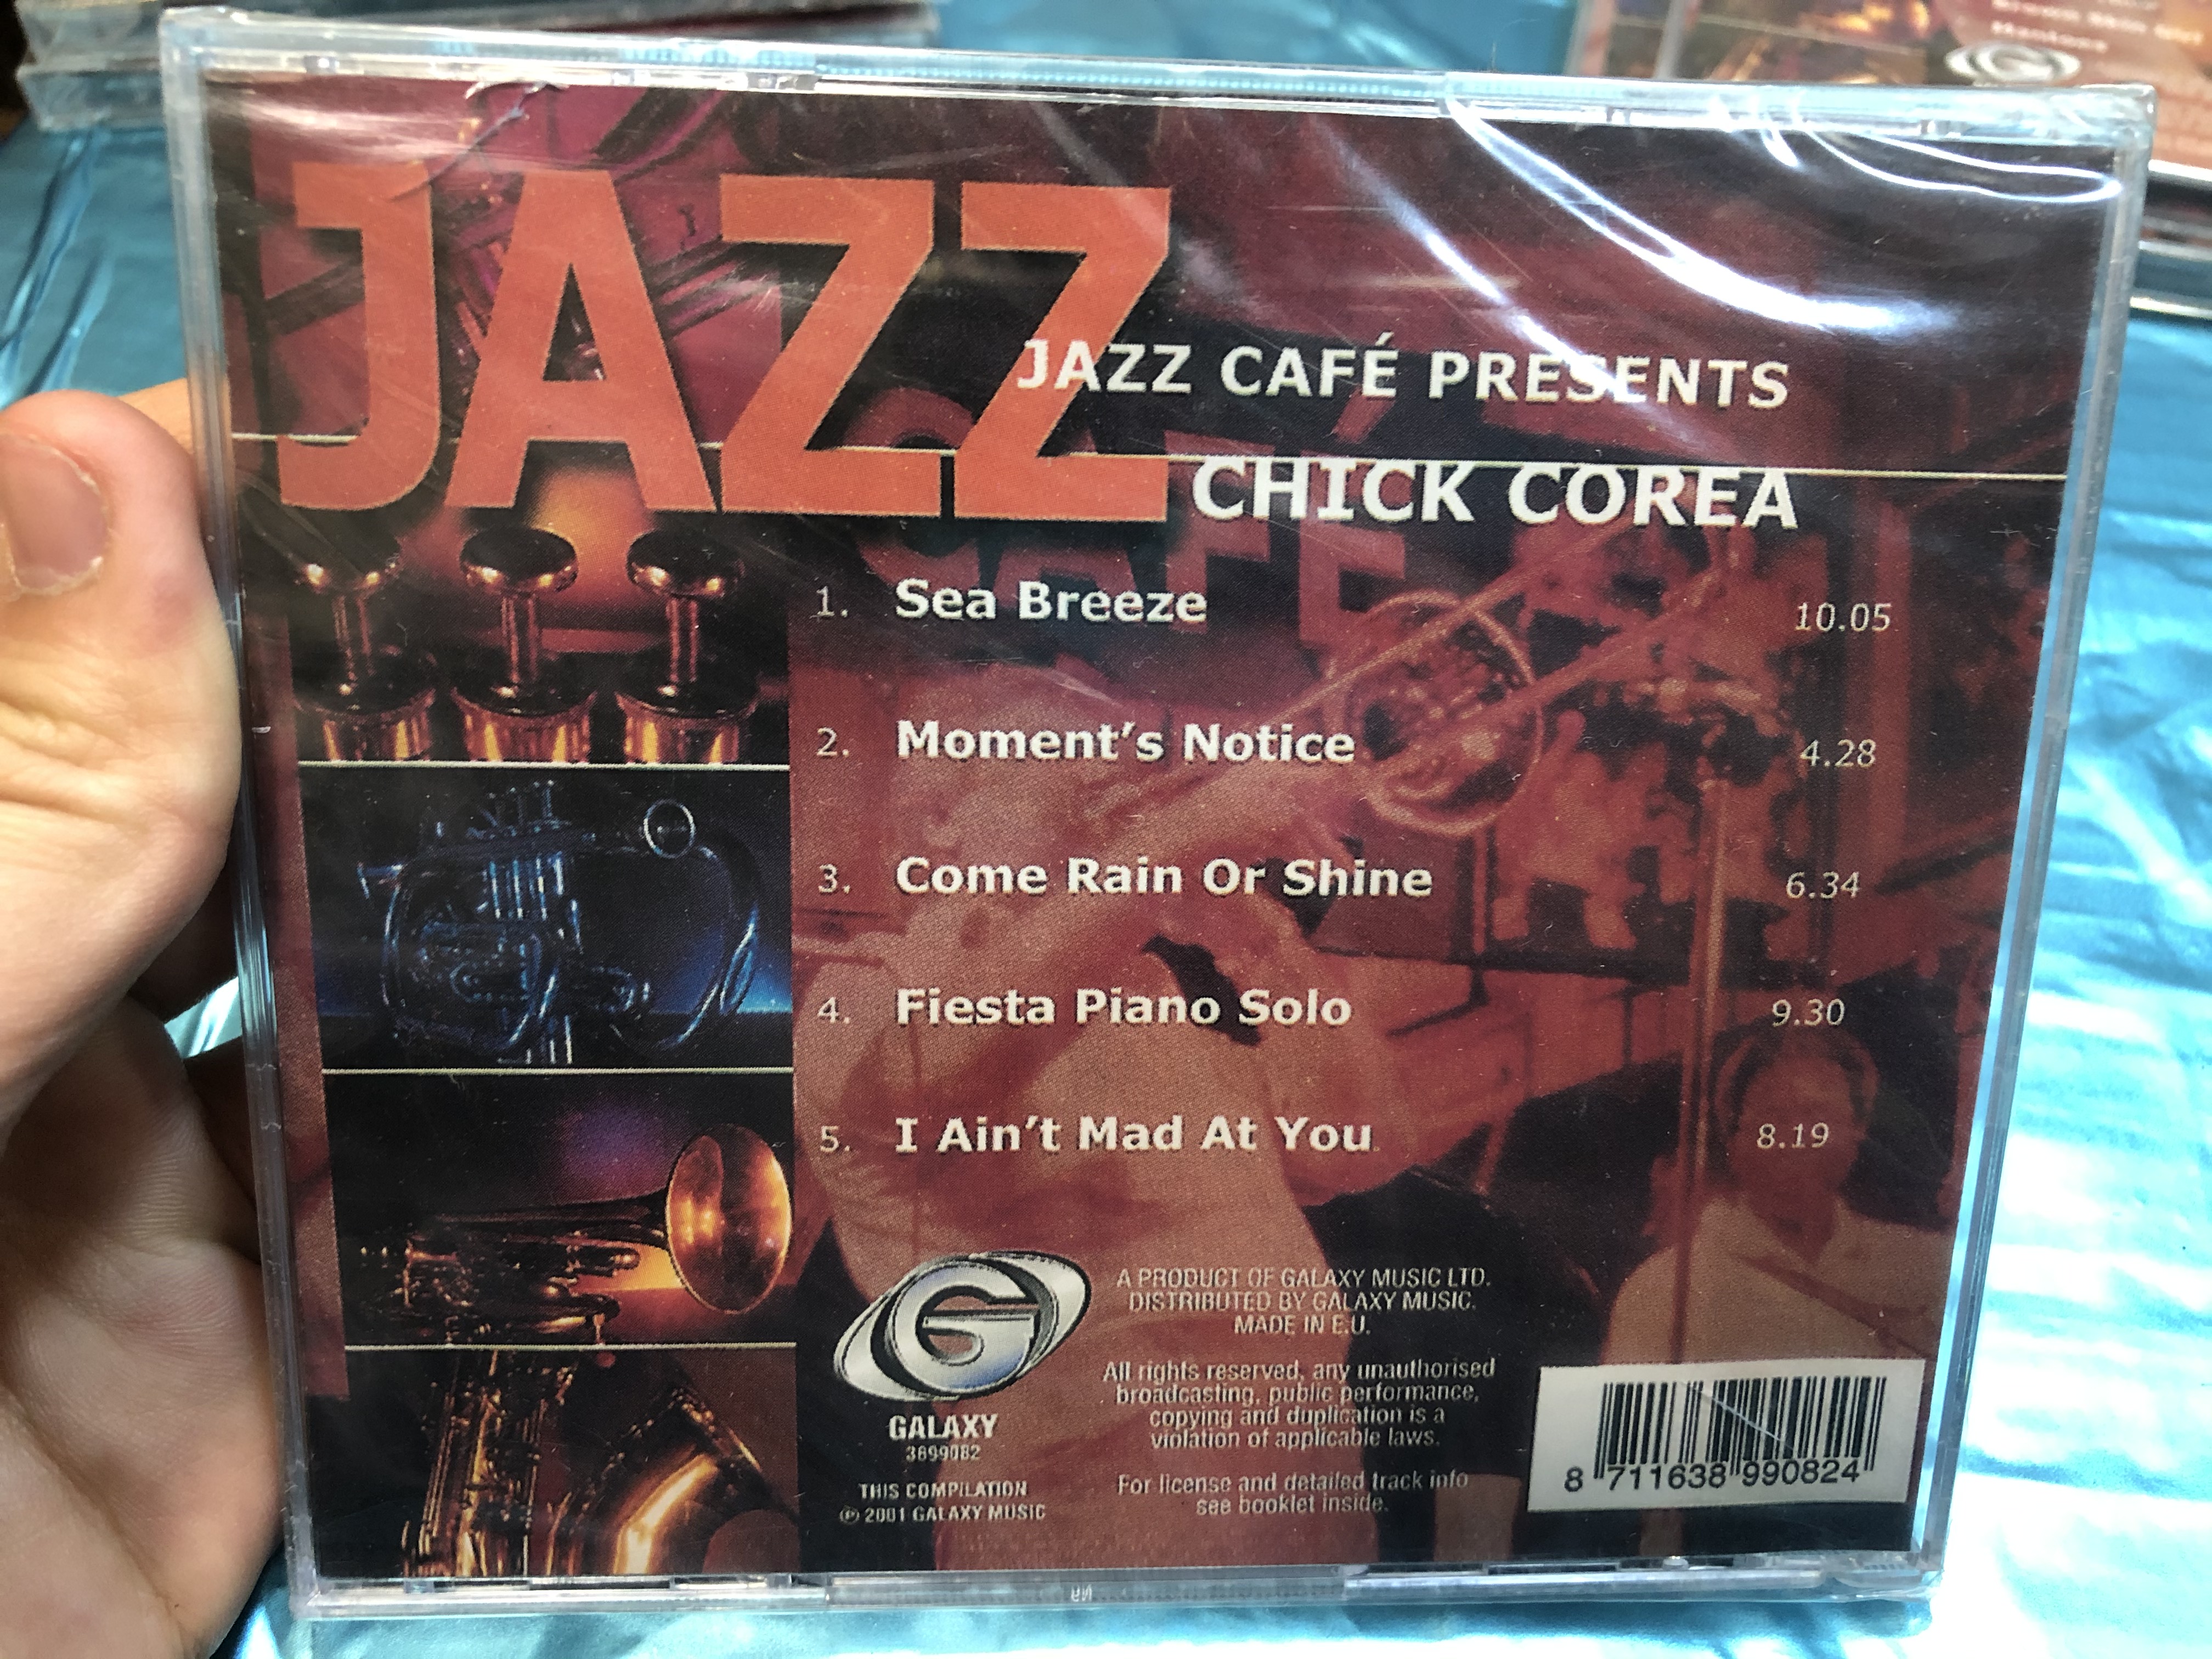 jazz-caf-presents-chick-corea-recorded-januari-22nd-1978-cannes-france-galaxy-music-audio-cd-2001-3899082-3-.jpg